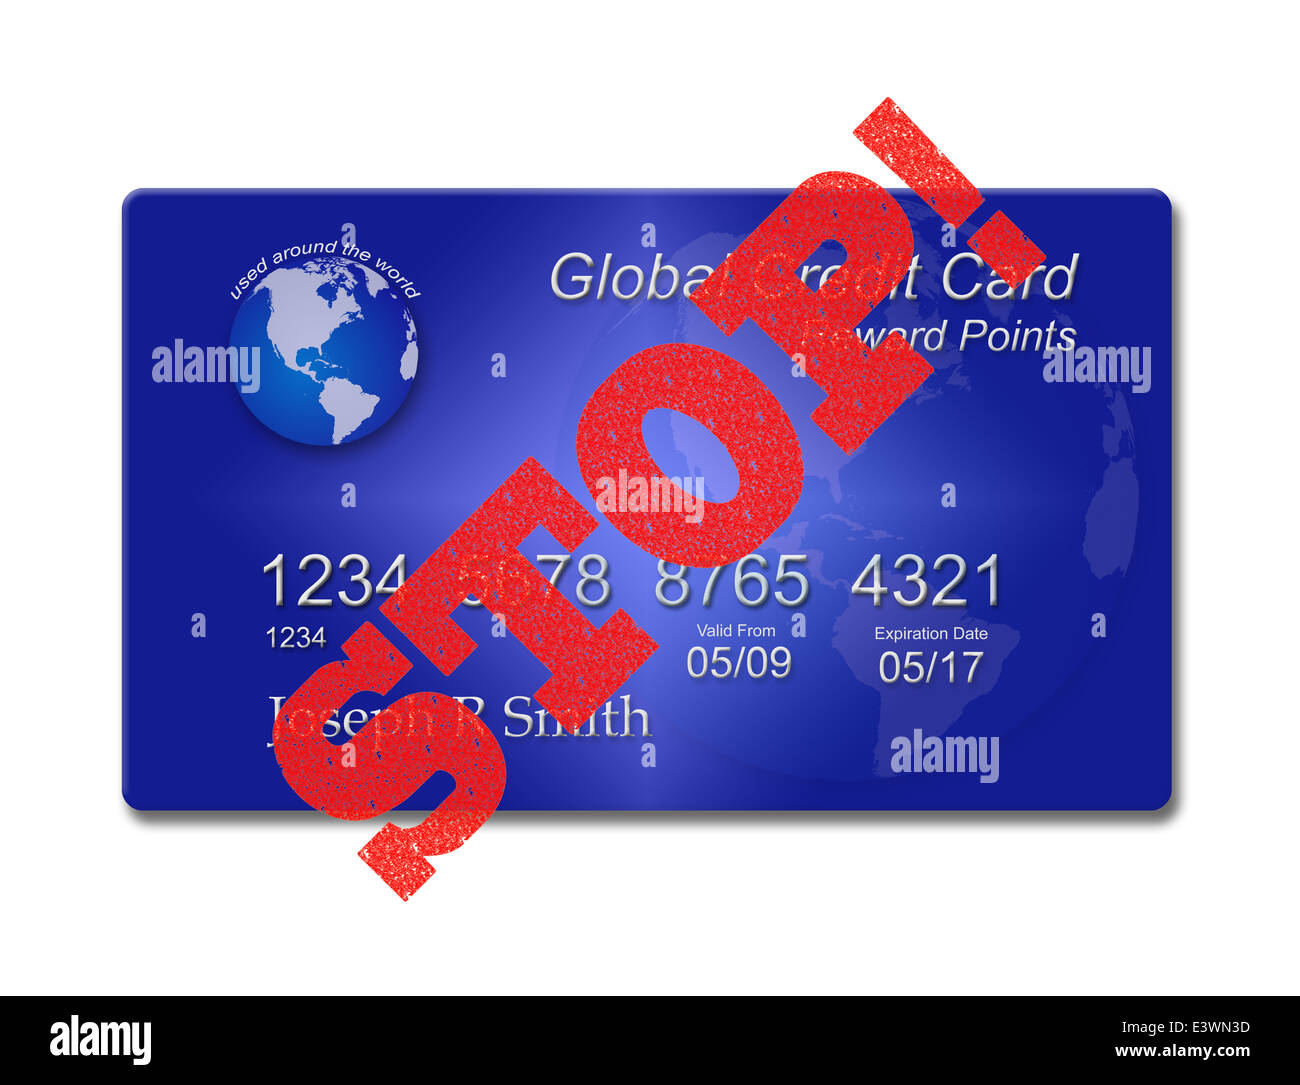 Illustration of Credit Card with Stop stamped across the card Stock Photo